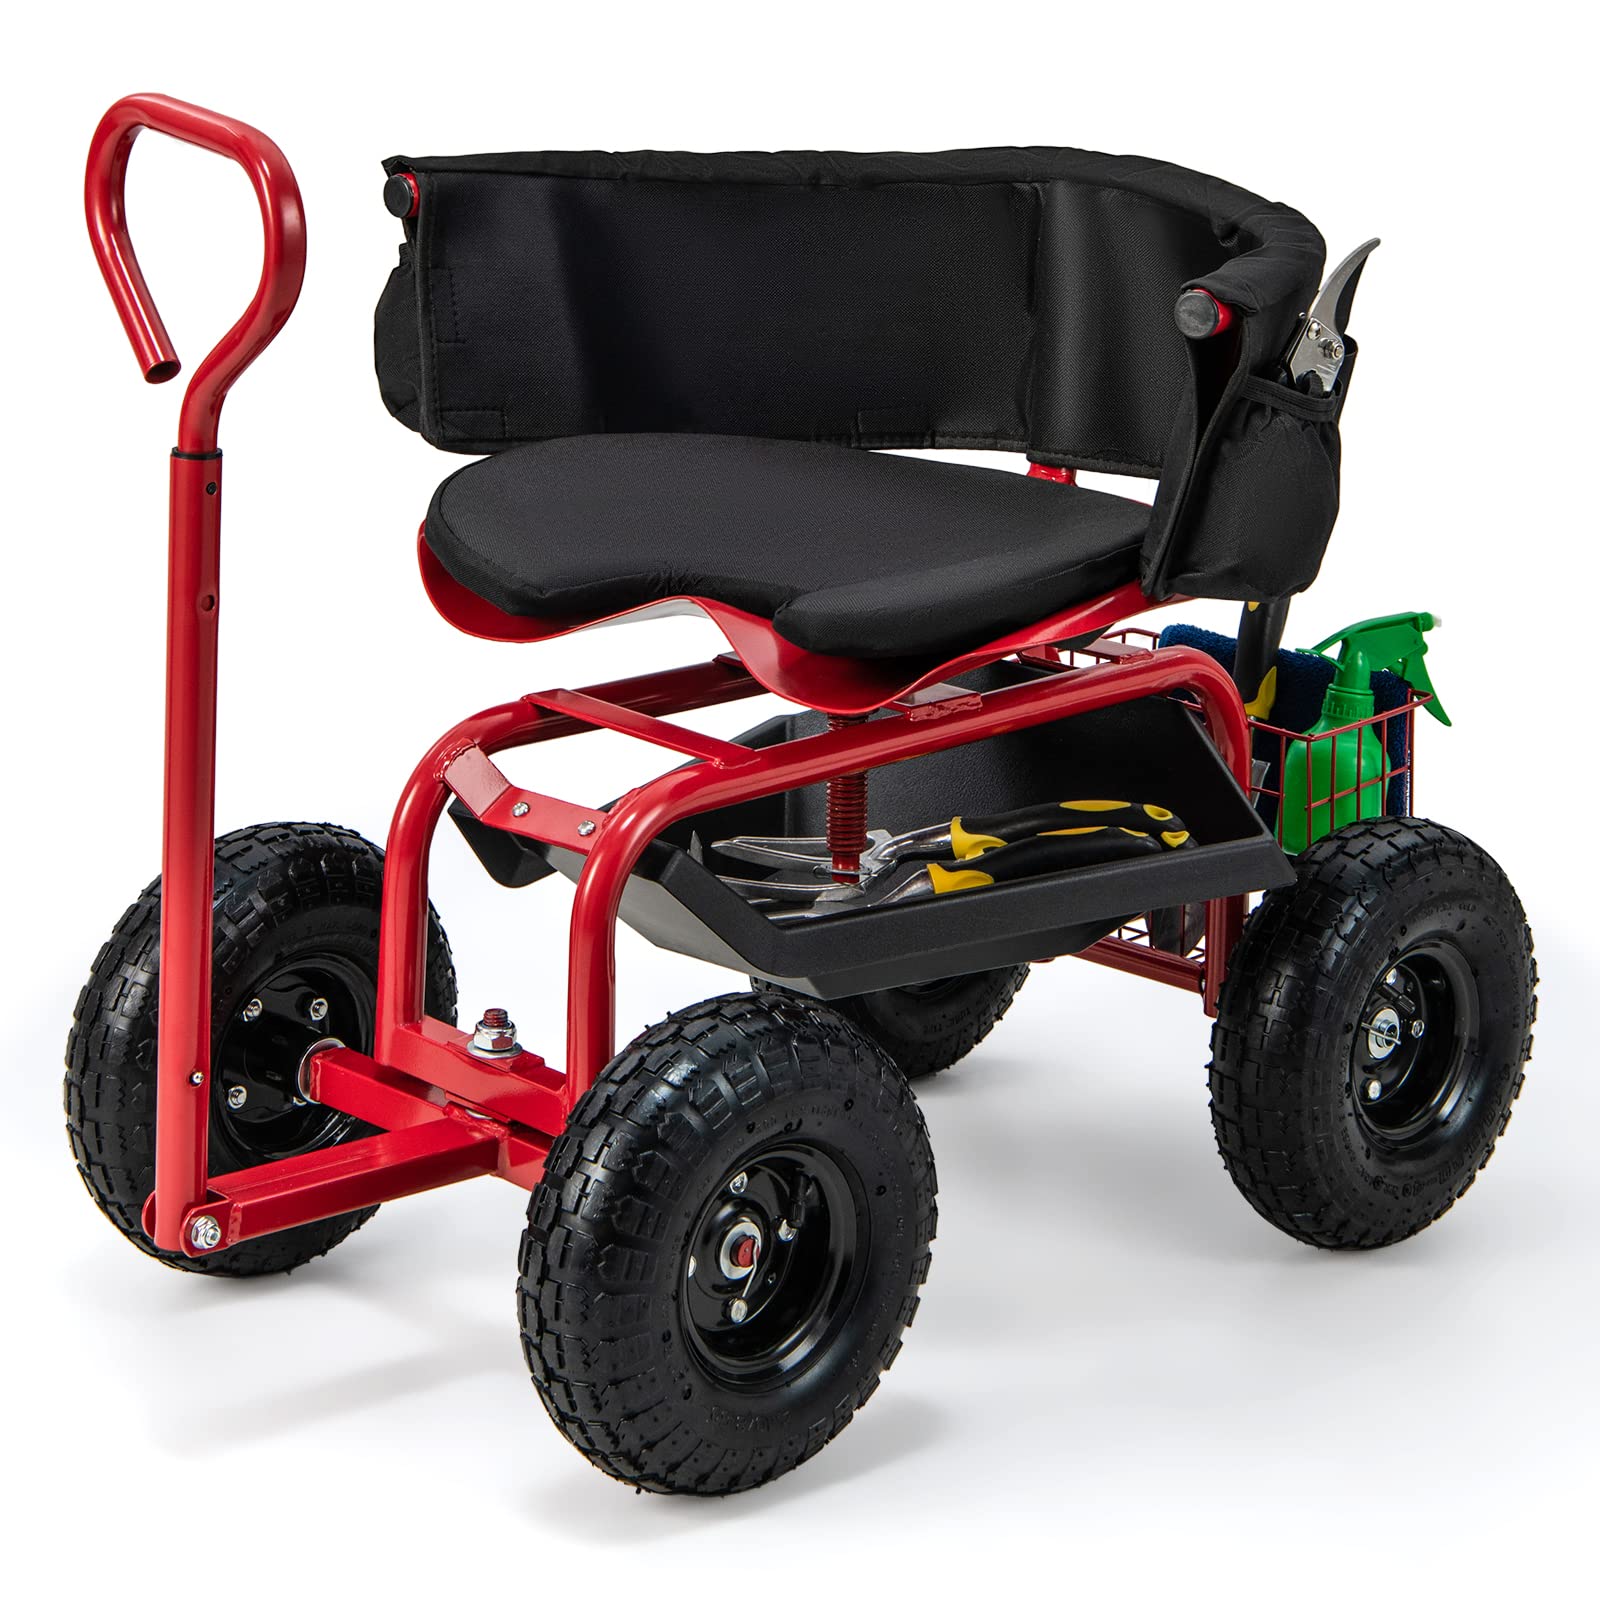 Giantex Rolling Garden Cart, 360 Swivel Workseat with 4 Wheels, Removal Cushion & Tool Tray, Storage Basket